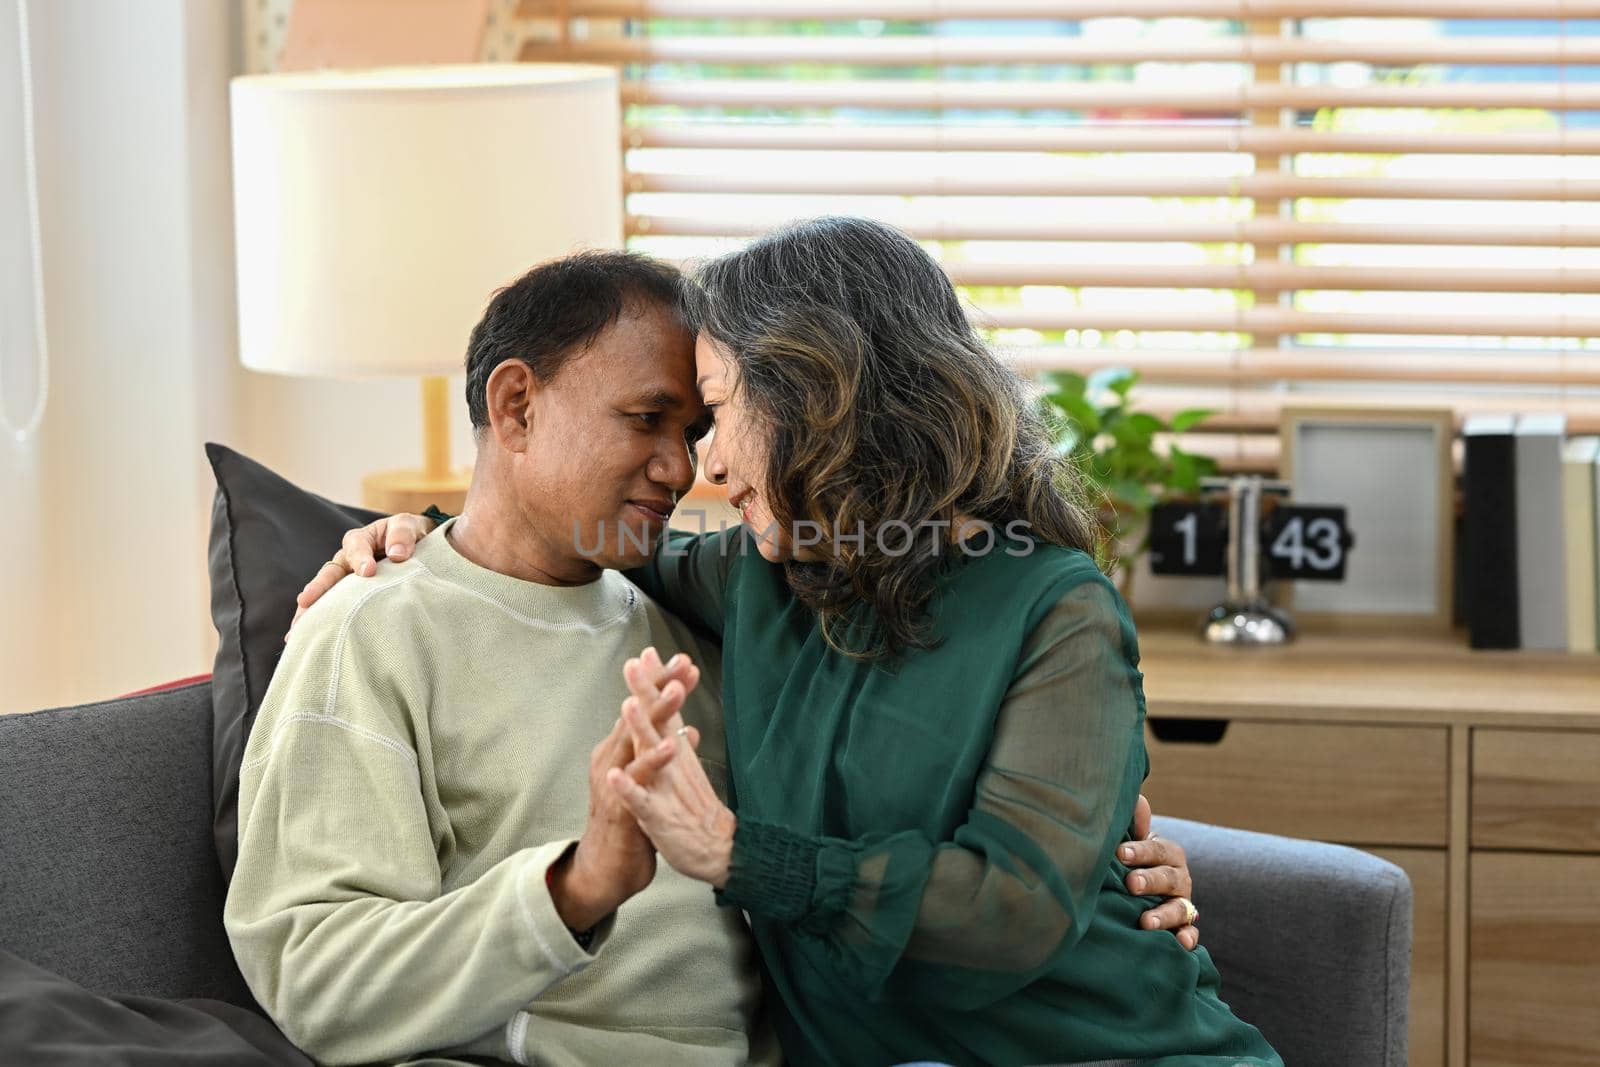 Romantic senior couple relaxing, enjoy weekend incopy living room together. Retirement lifestyle, health insurance concept.